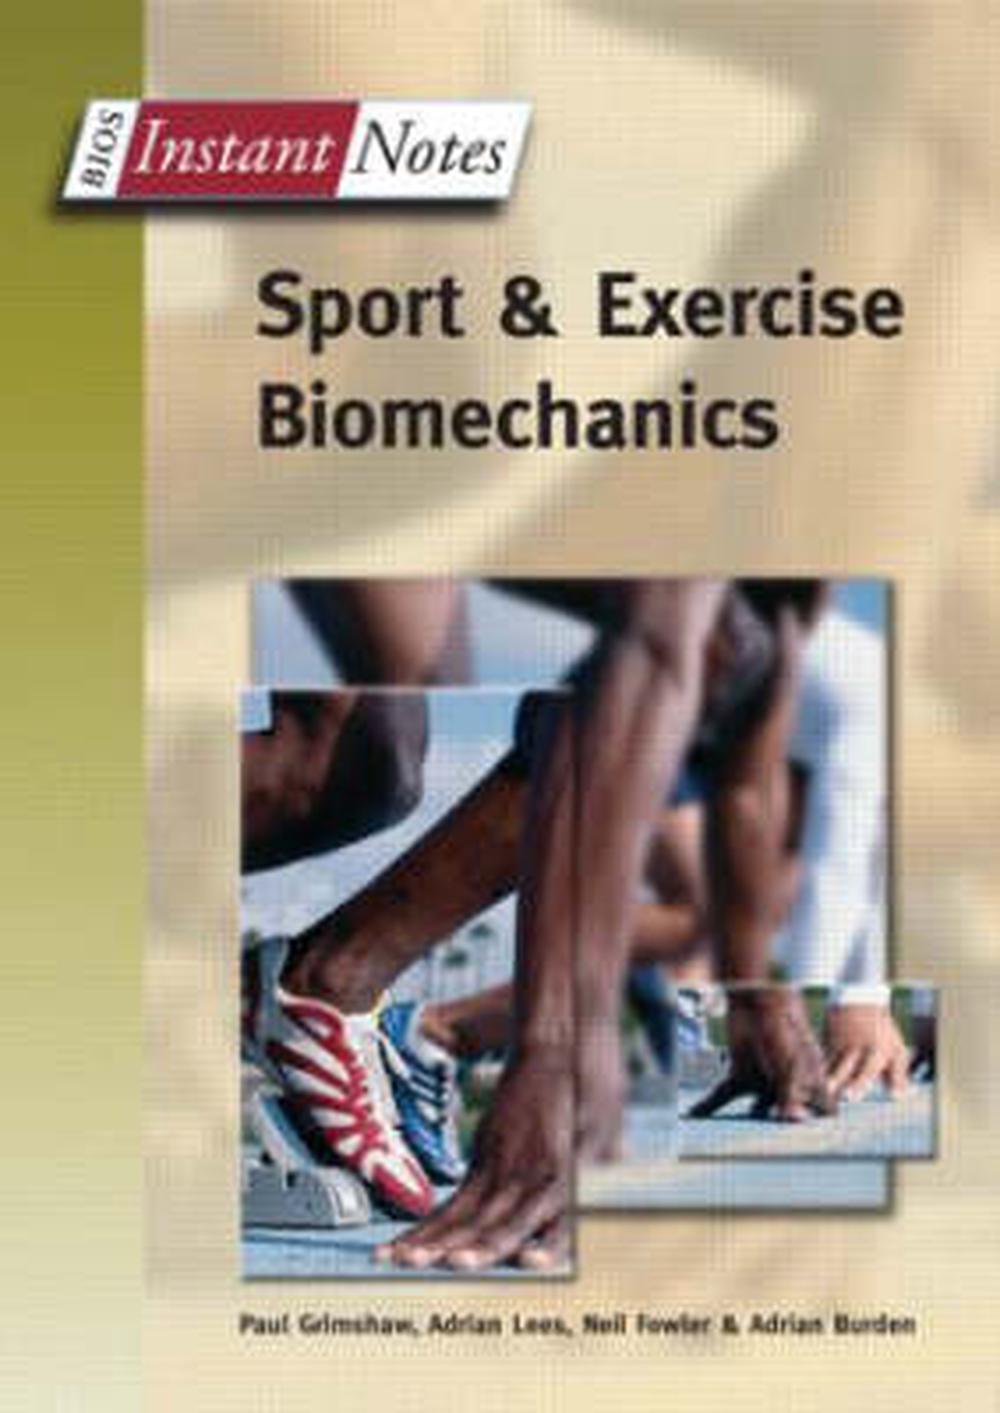 Sport and Exercise Biomechanics 1st Edition by Paul Grimshaw (English) Paperback 9781859962848